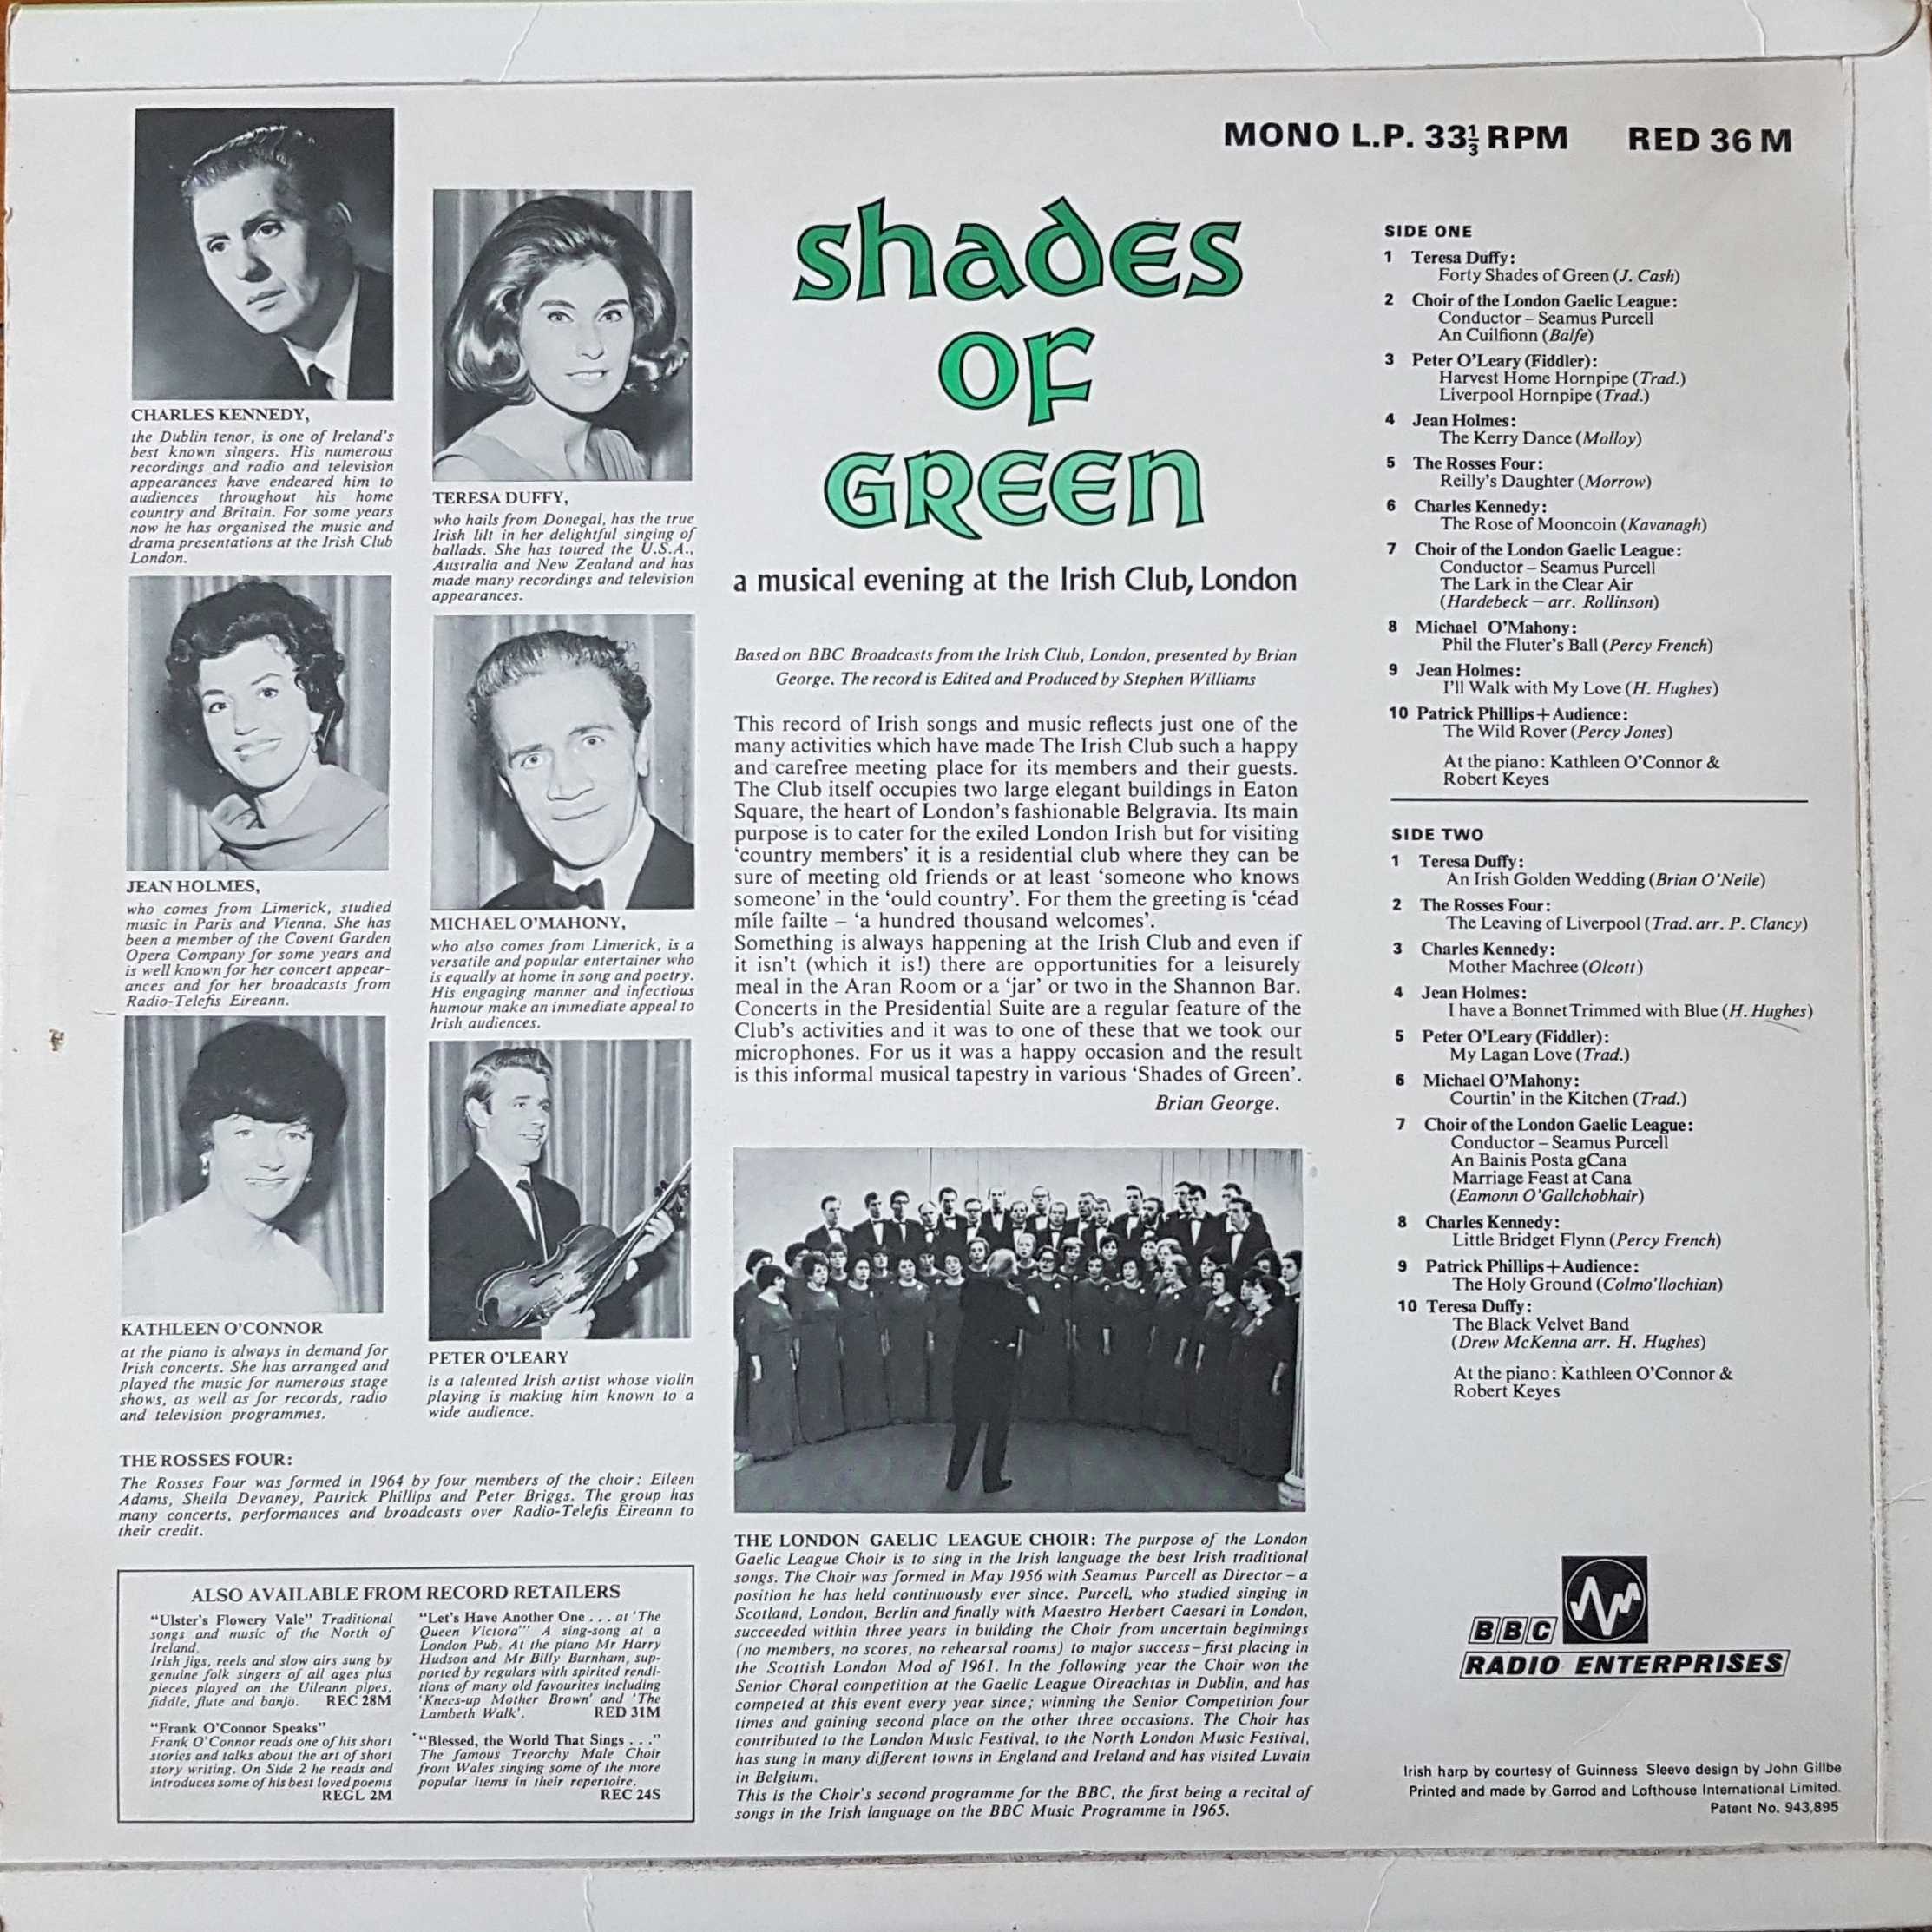 Picture of RED 36 Shades of green by artist Various from the BBC records and Tapes library